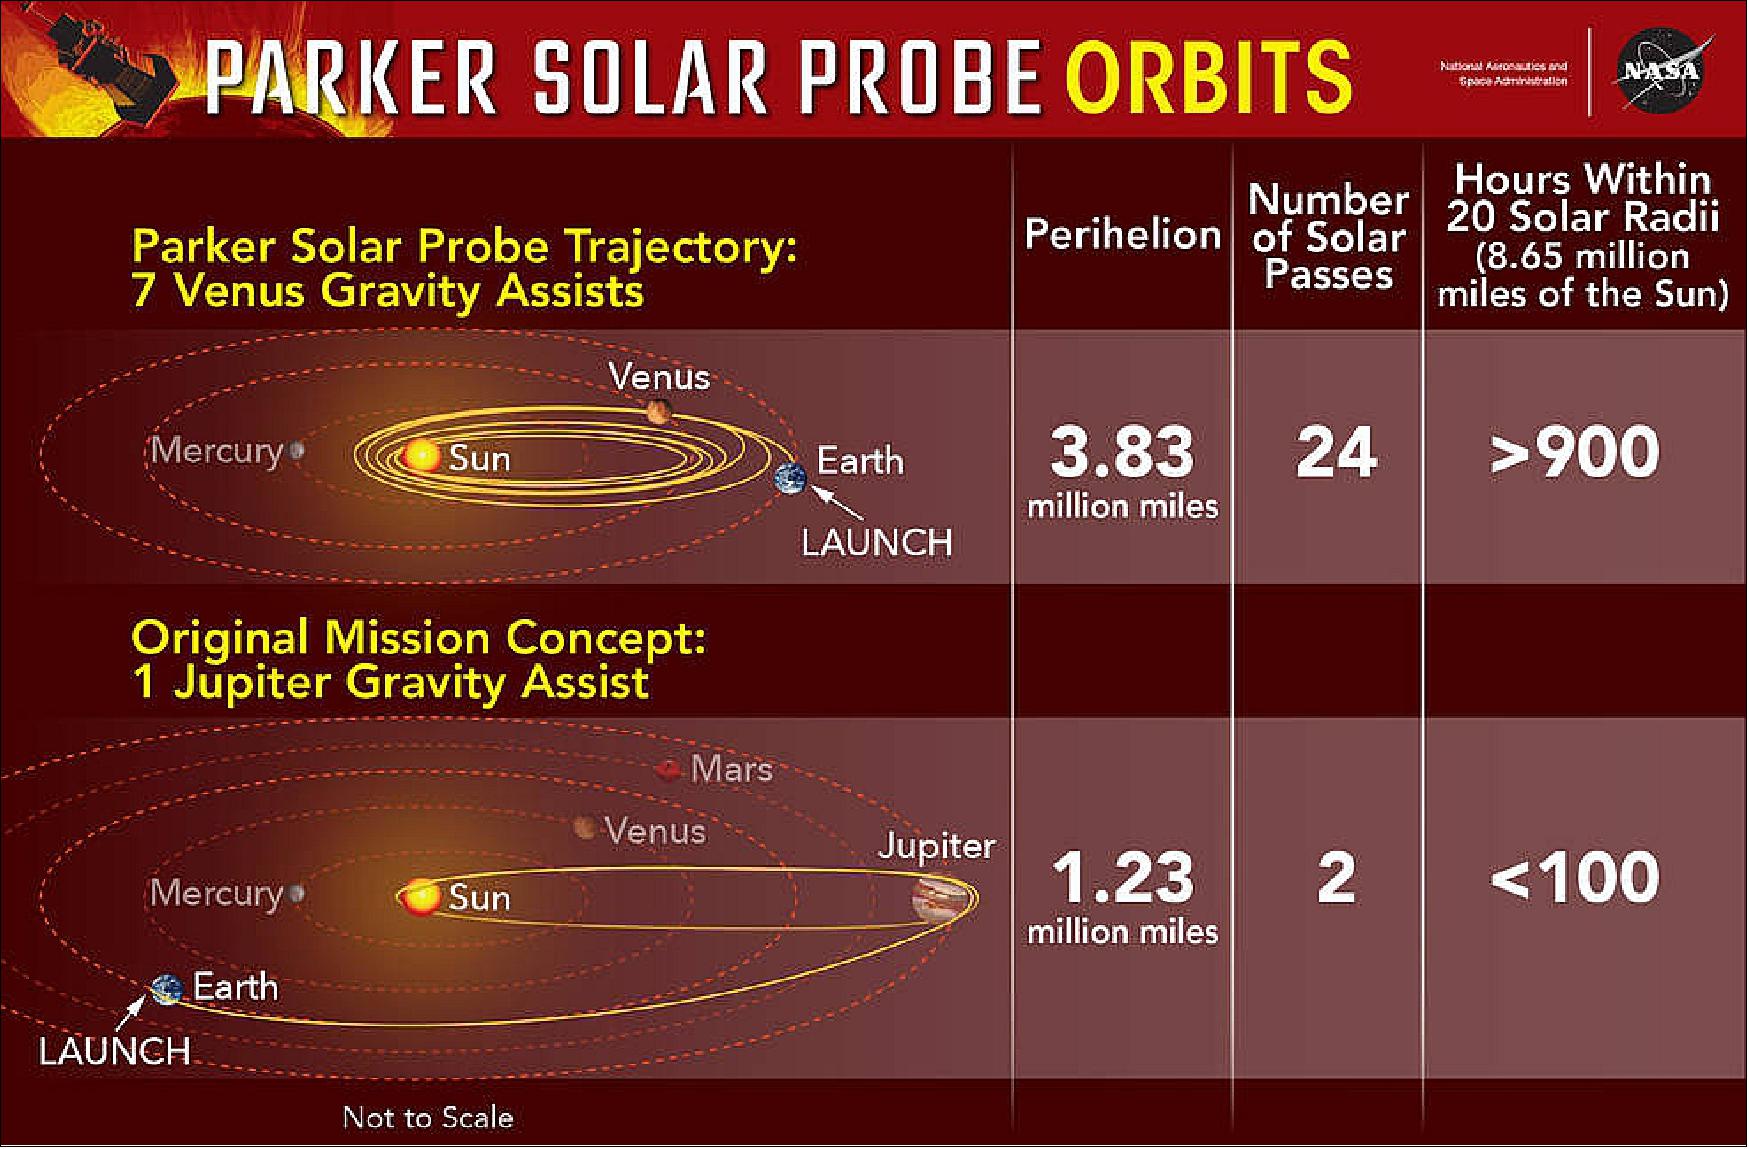 Figure 17: The final orbit for the Parker Solar Probe mission uses seven Venus gravity assists to rack up more than 900 hours close to the Sun. The original mission concept, using a single Jupiter gravity assist, got the spacecraft closer to the Sun, but gave scientists less than 100 hours in key areas (image credit: NASA's Goddard Space Flight Center/Mary Pat Hrybyk-Keith)